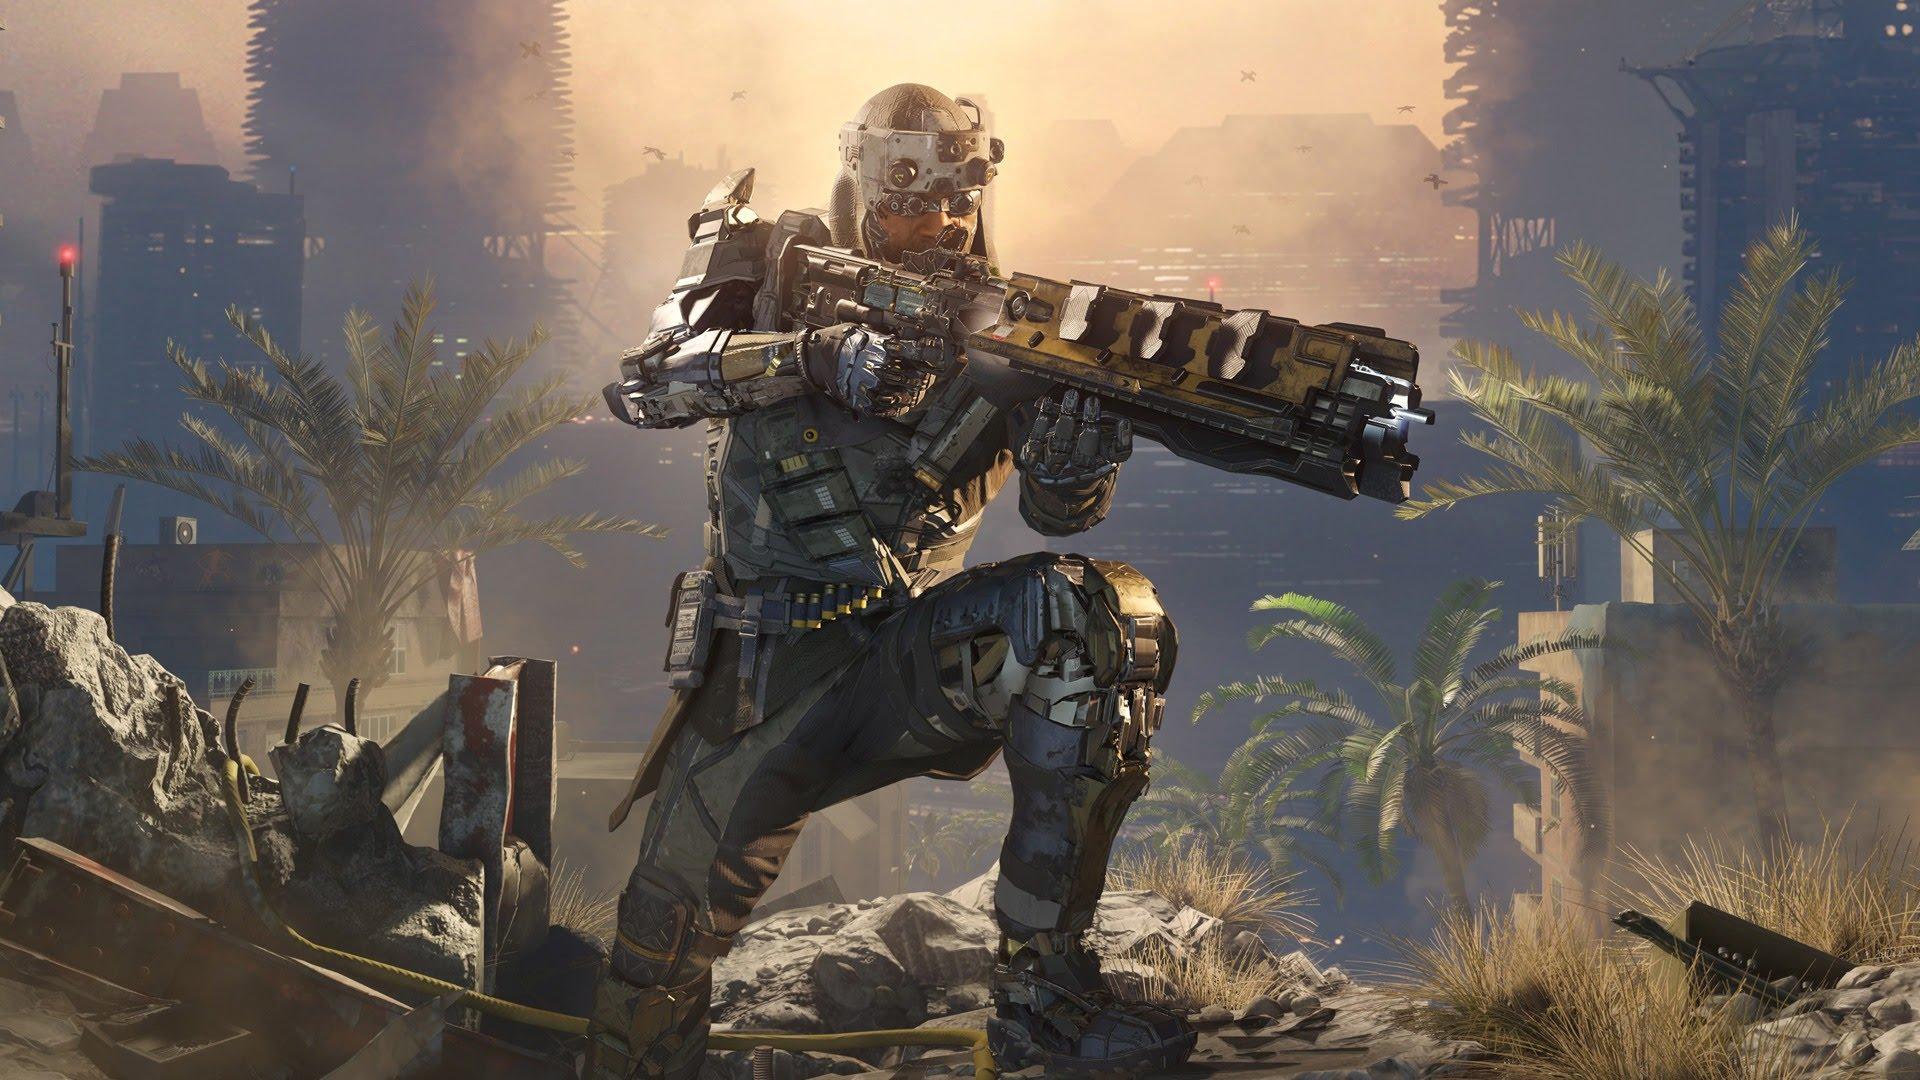 Black Ops 4 finally introduces competitive mode